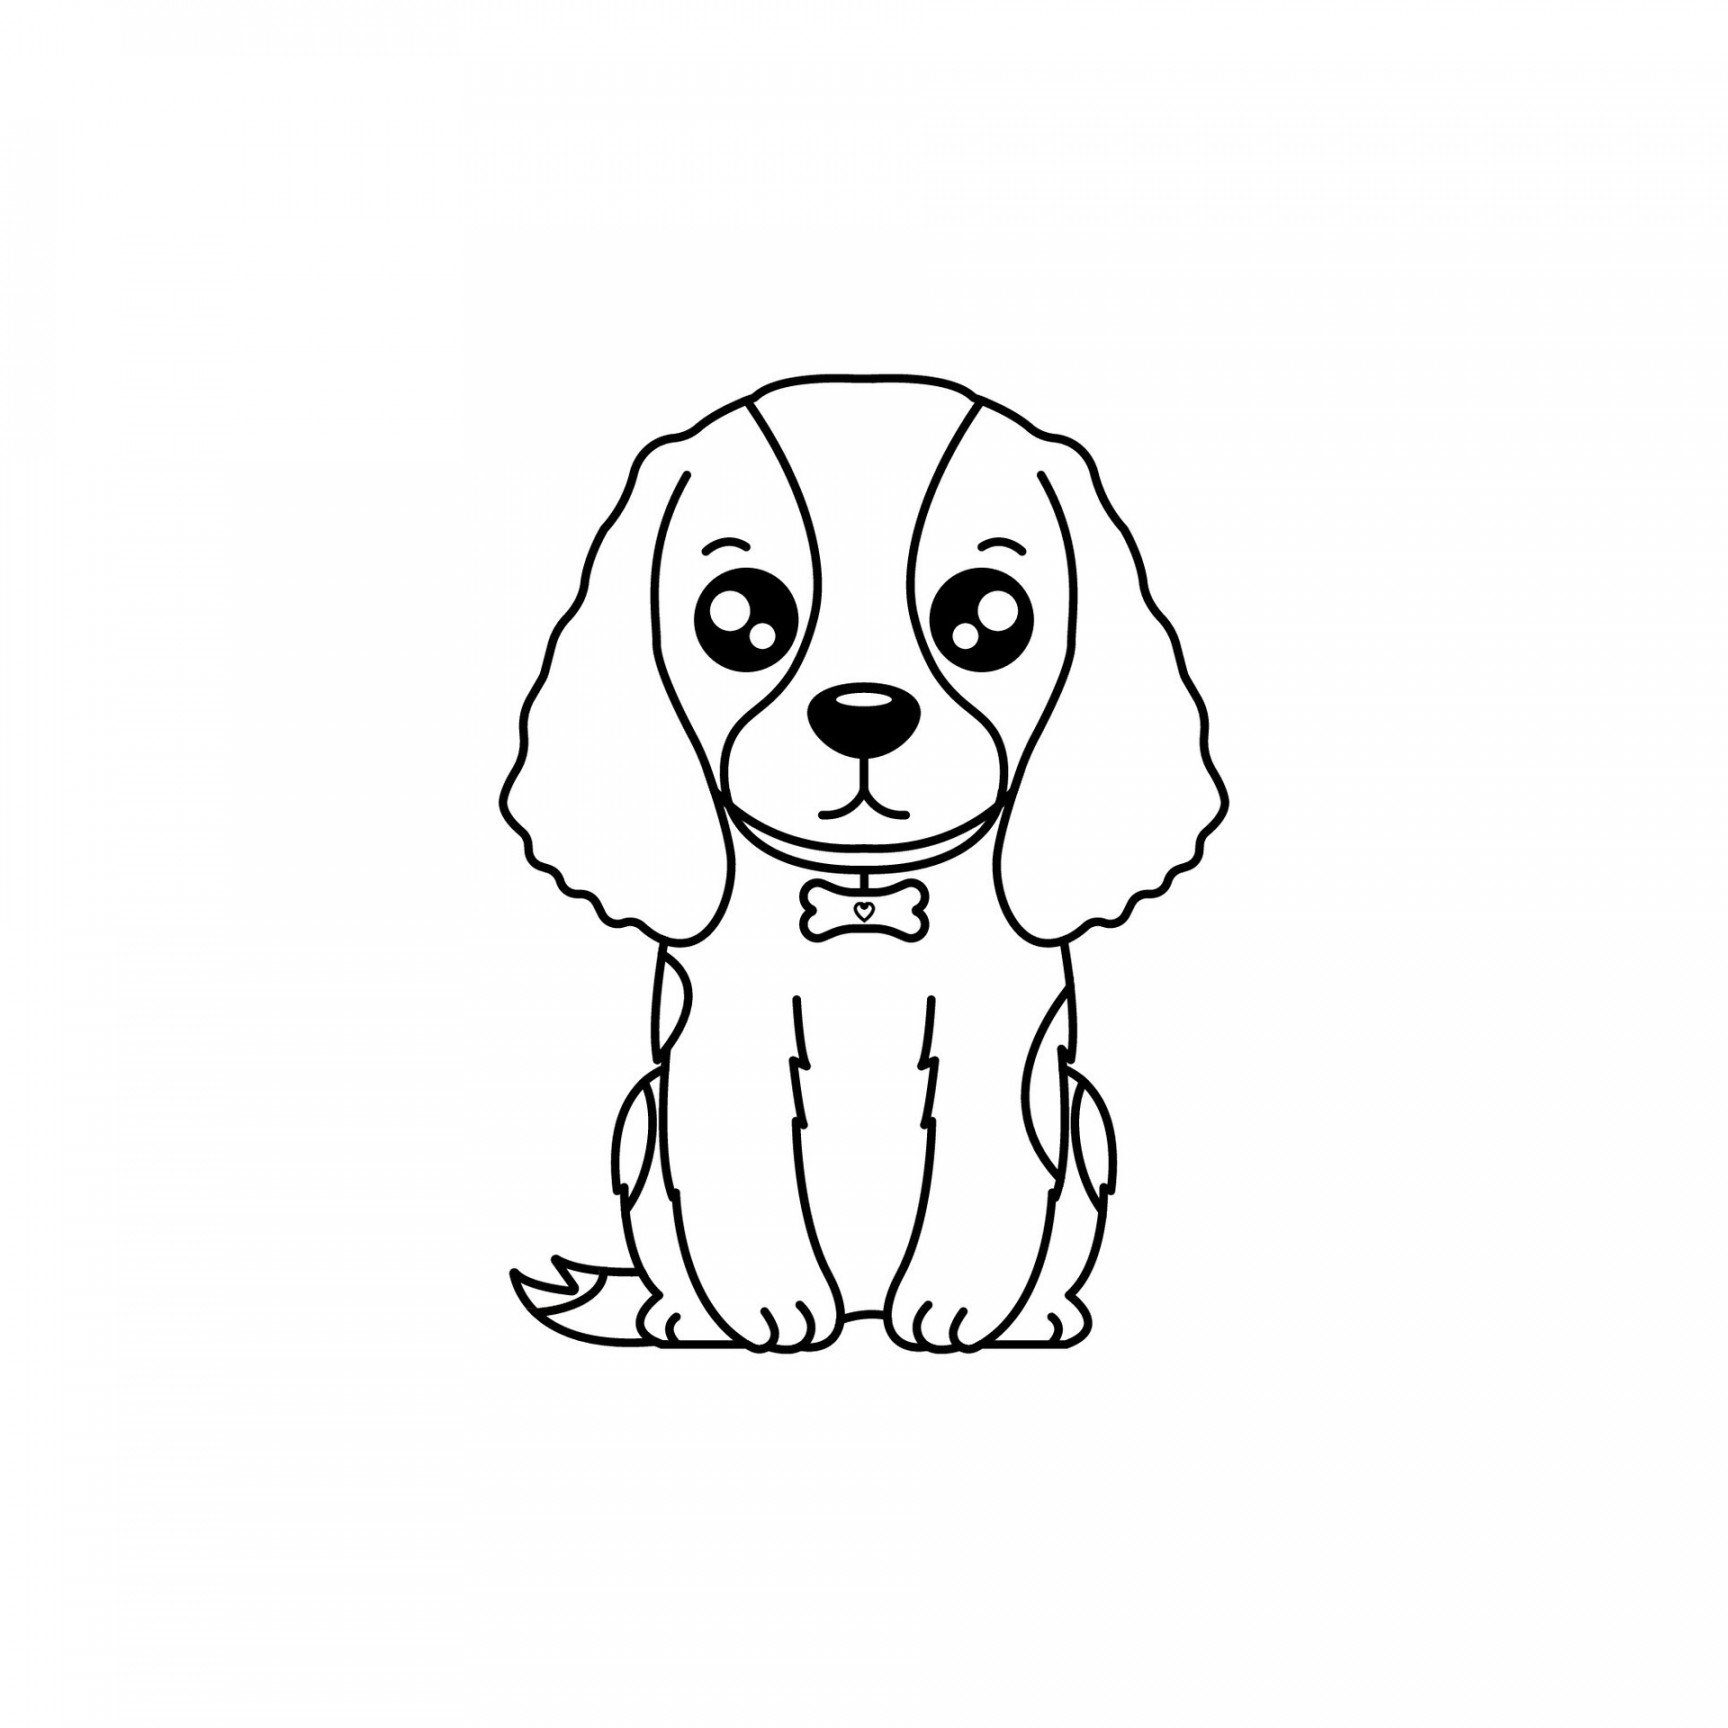 Dog vector illustration template for Coloring book